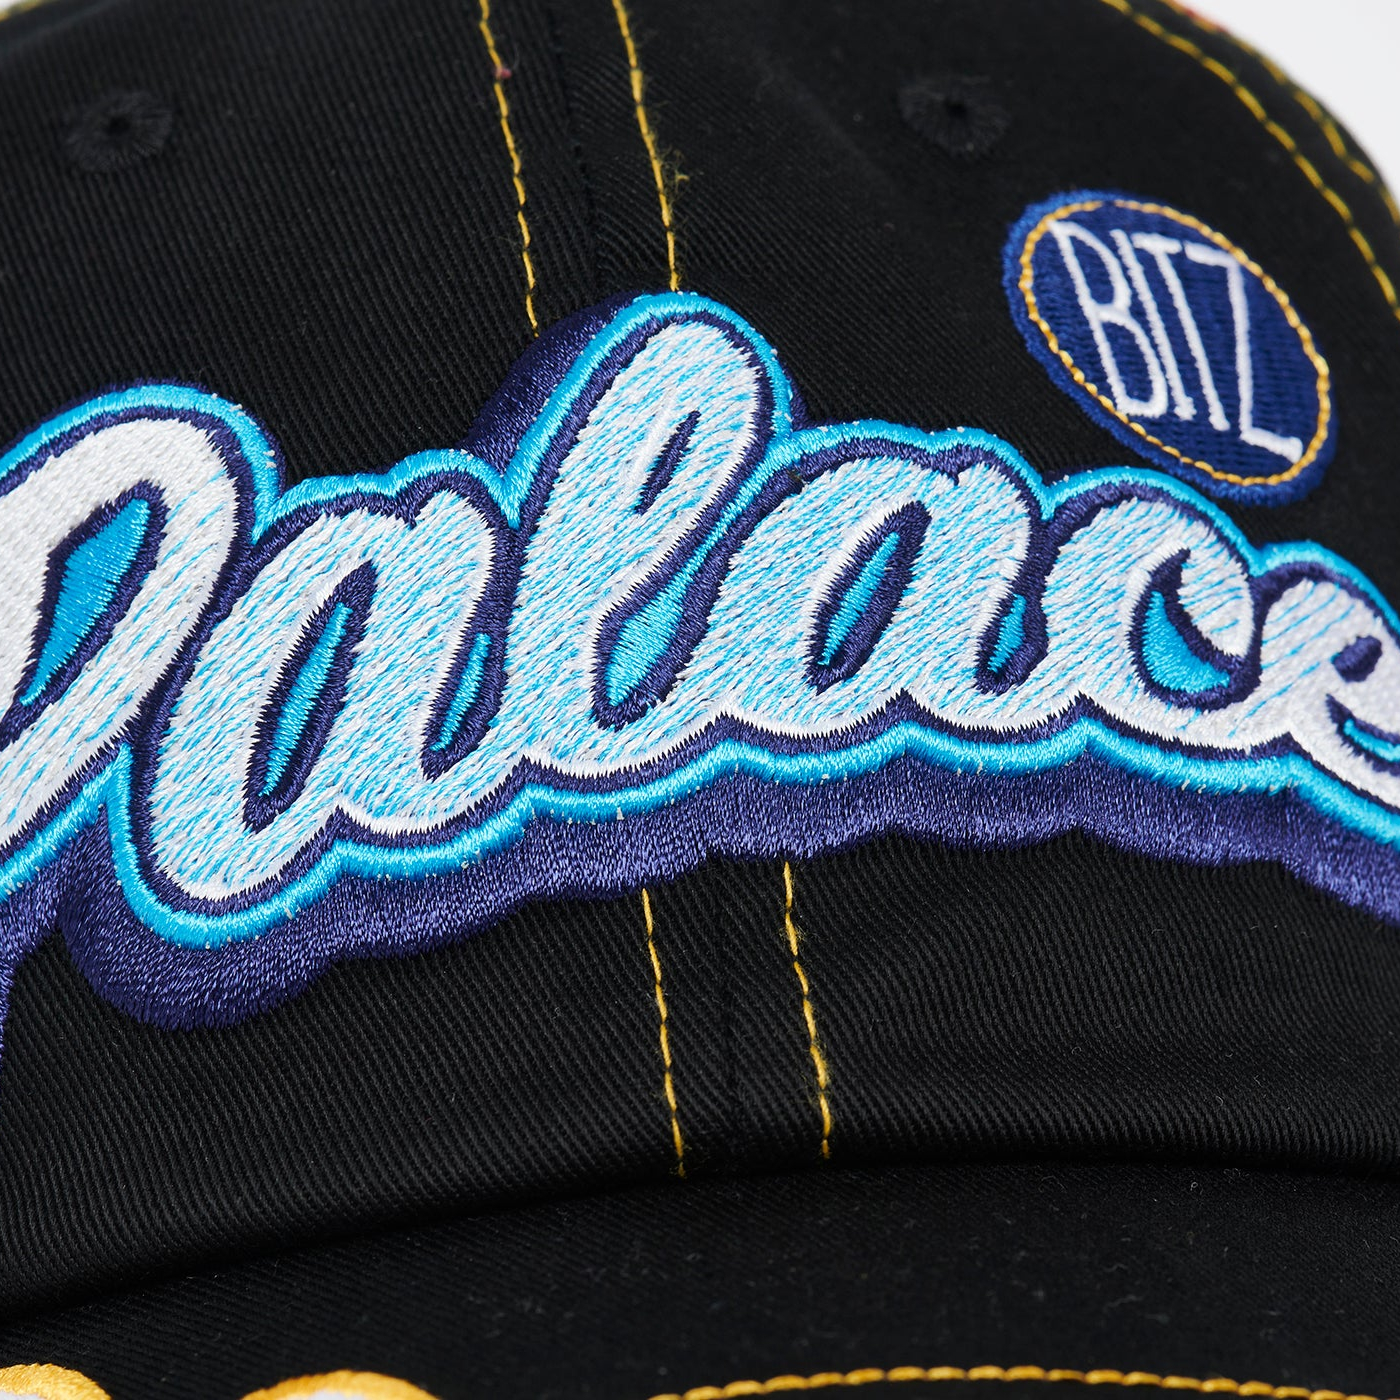 Thumbnail PALACE TEAM RACING 6-PANEL BLACK one color